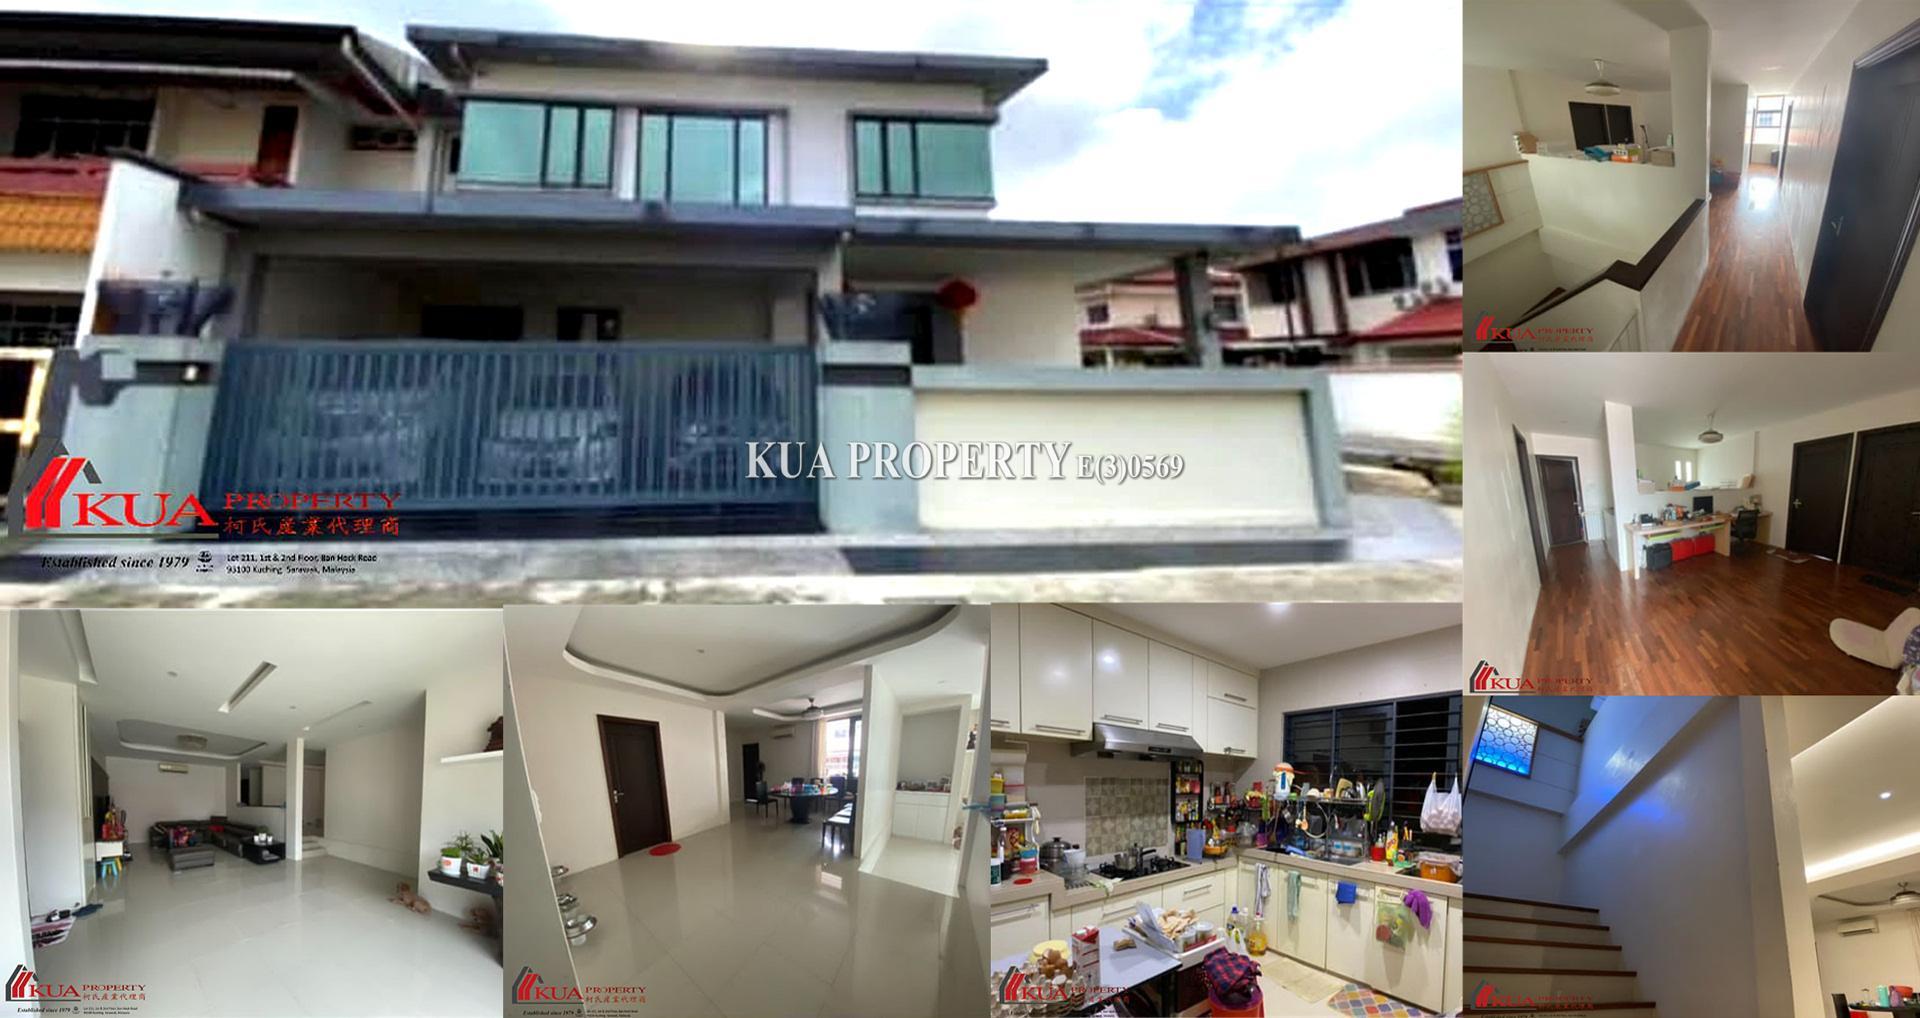 Double Storey Semi-Detached House For Sale! at Jalan Stampin